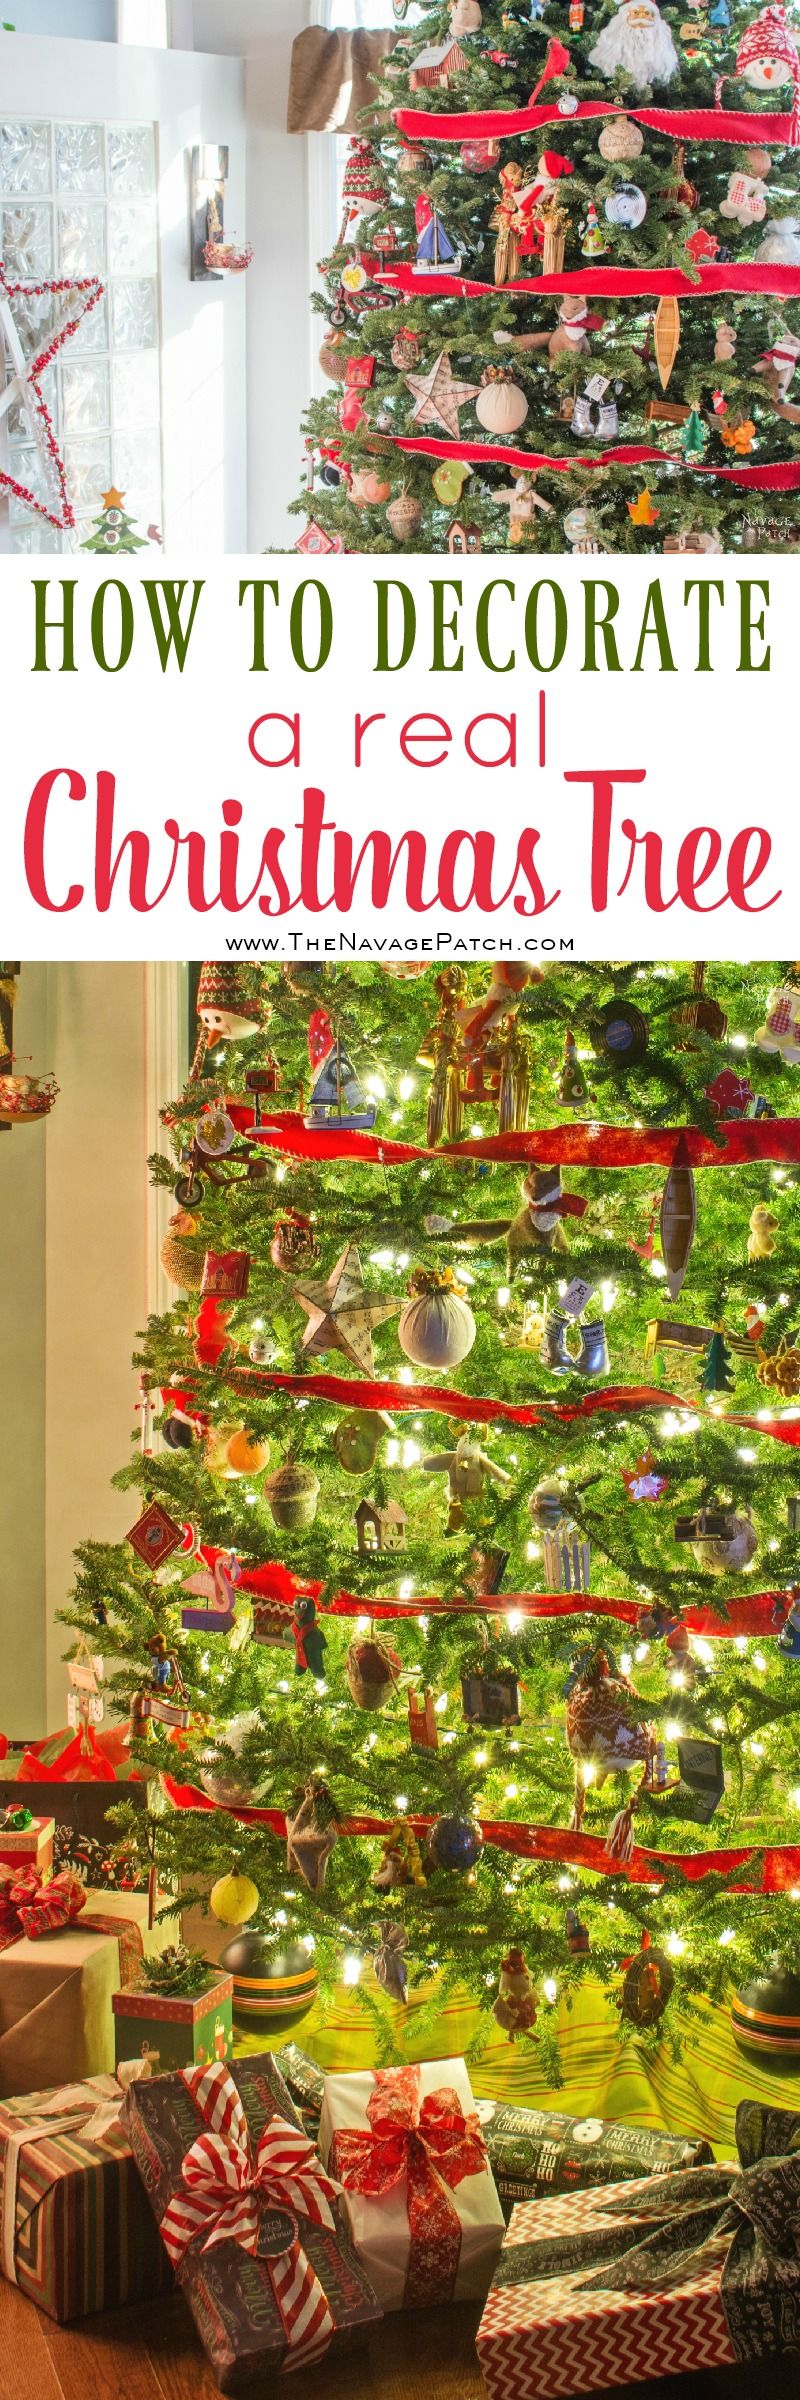 Trimming a sentimental Christmas tree | Christmas tree decoration tips | How to prune your Christmas tree to give the perfect shape | DIY sentimental Christmas ornaments | Christmas traditions | Festive holiday decoration | TheNavagePatch.com